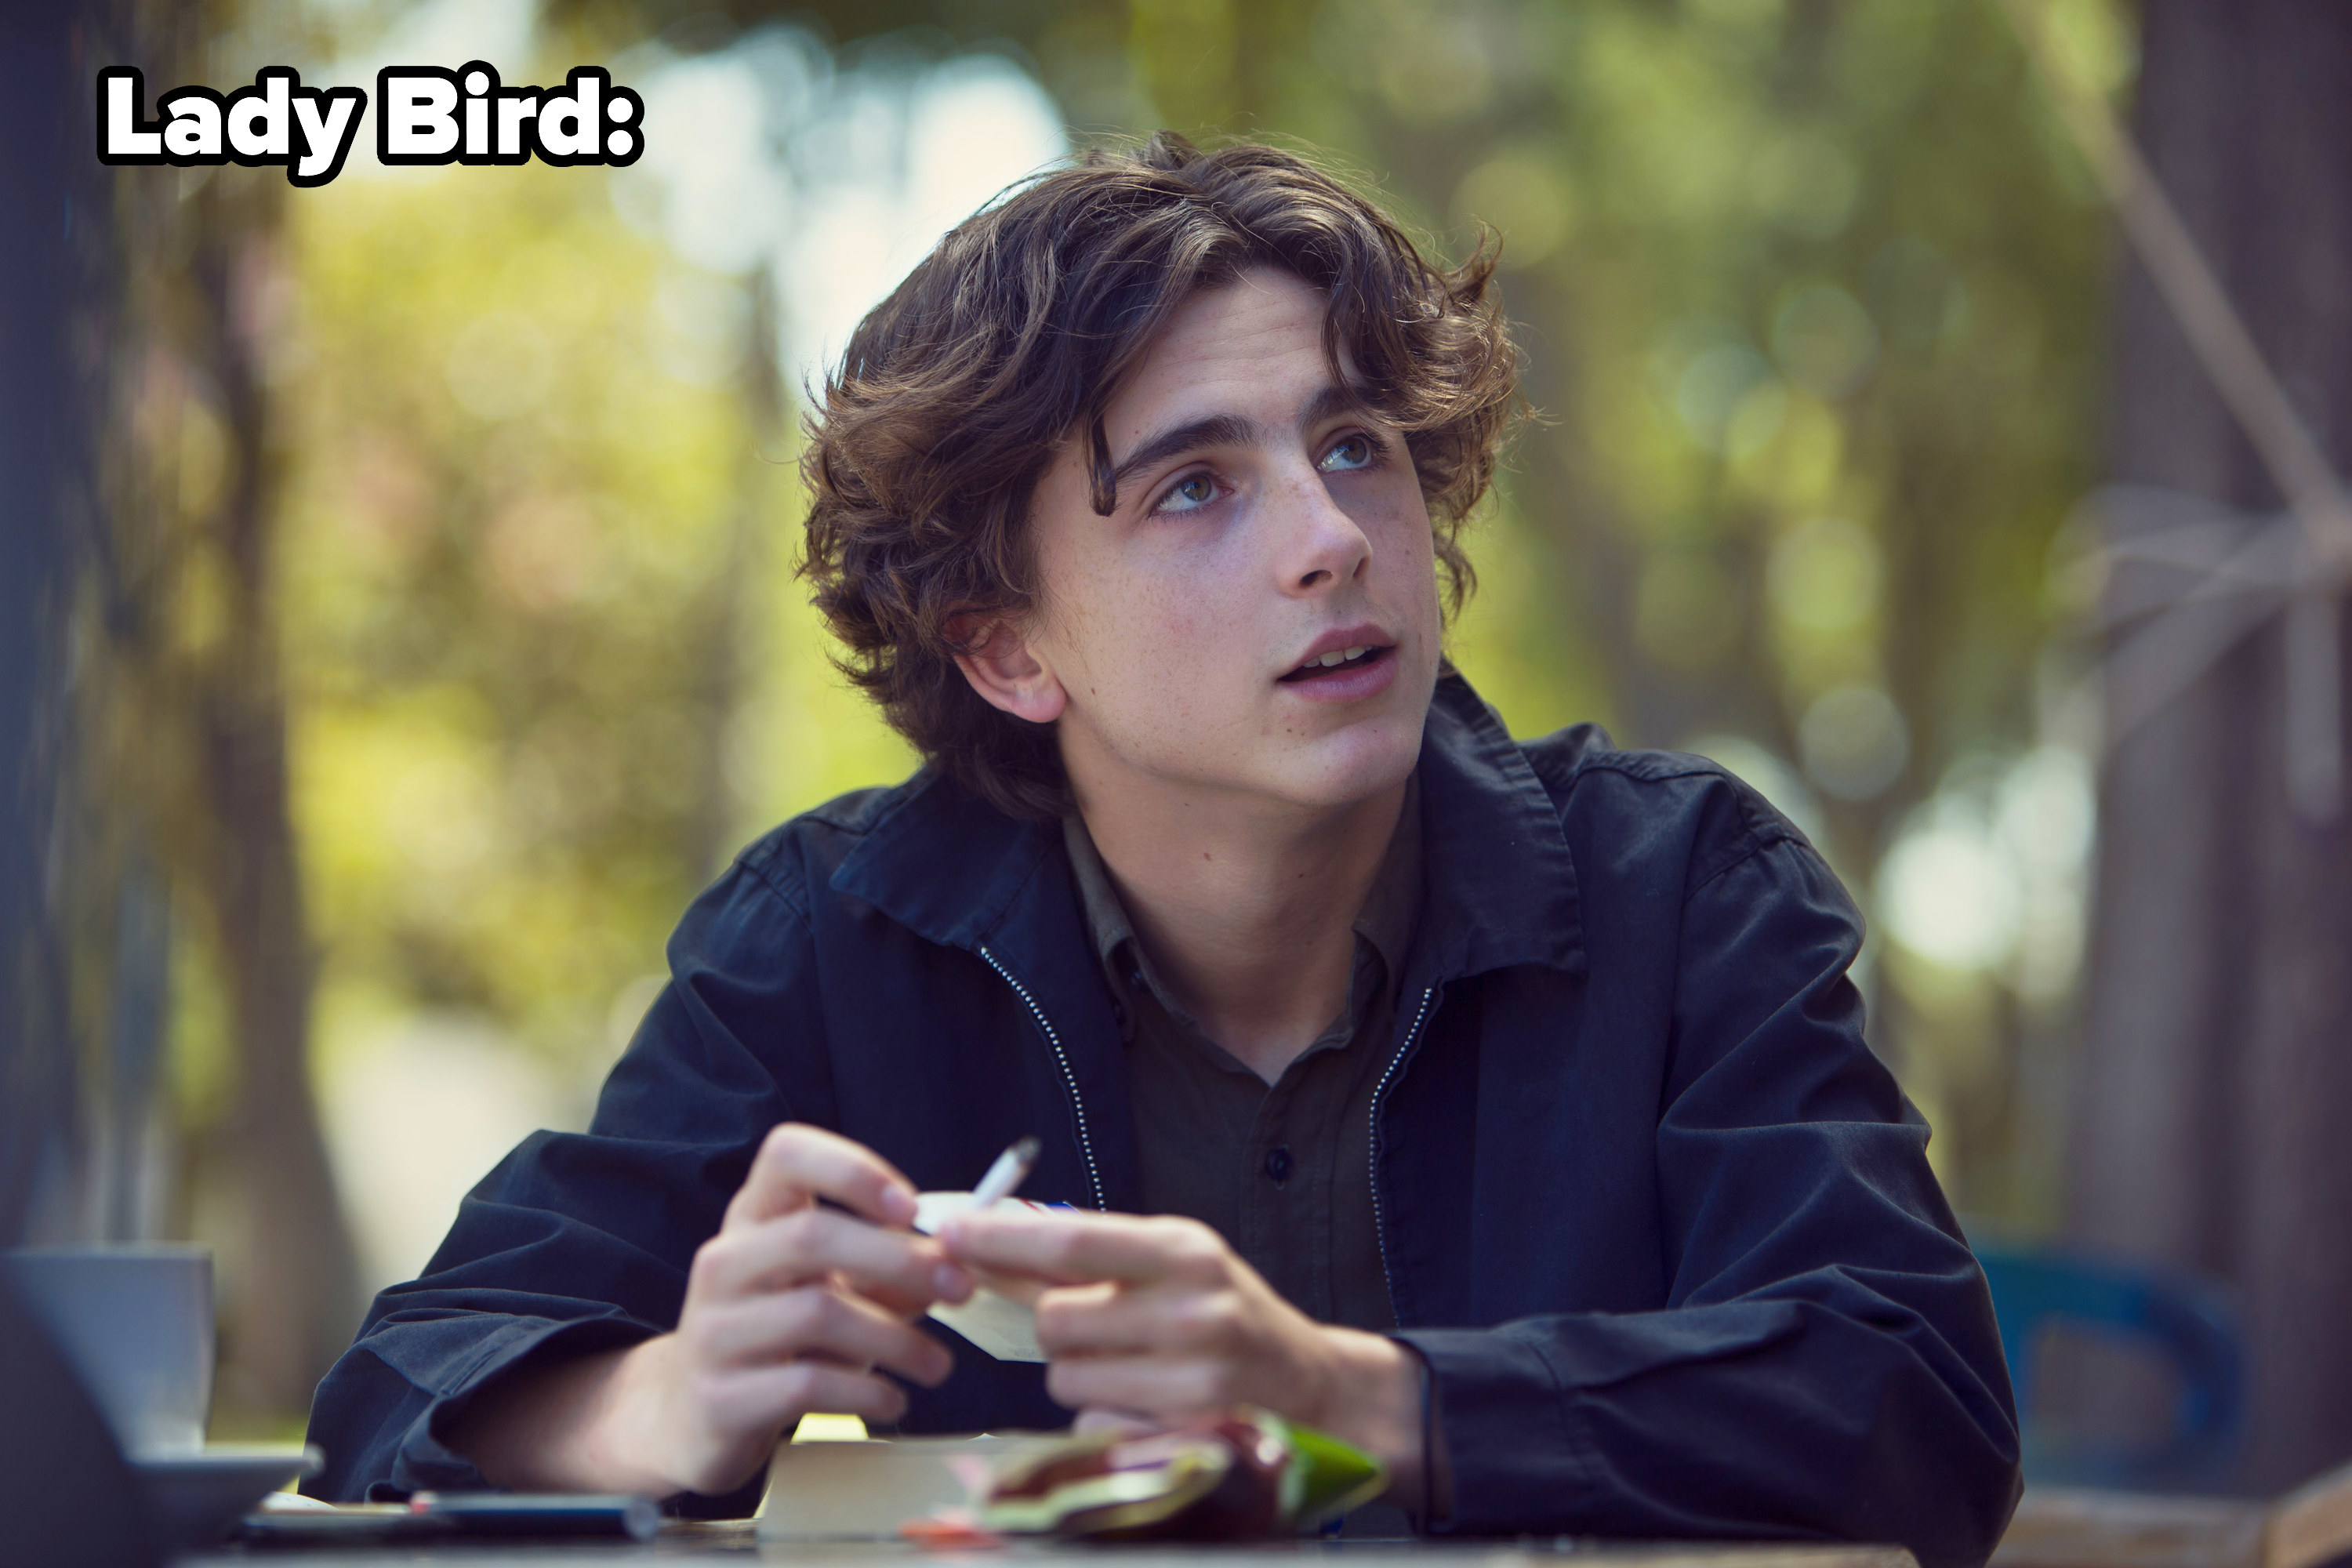 Timothee in Lady Bird